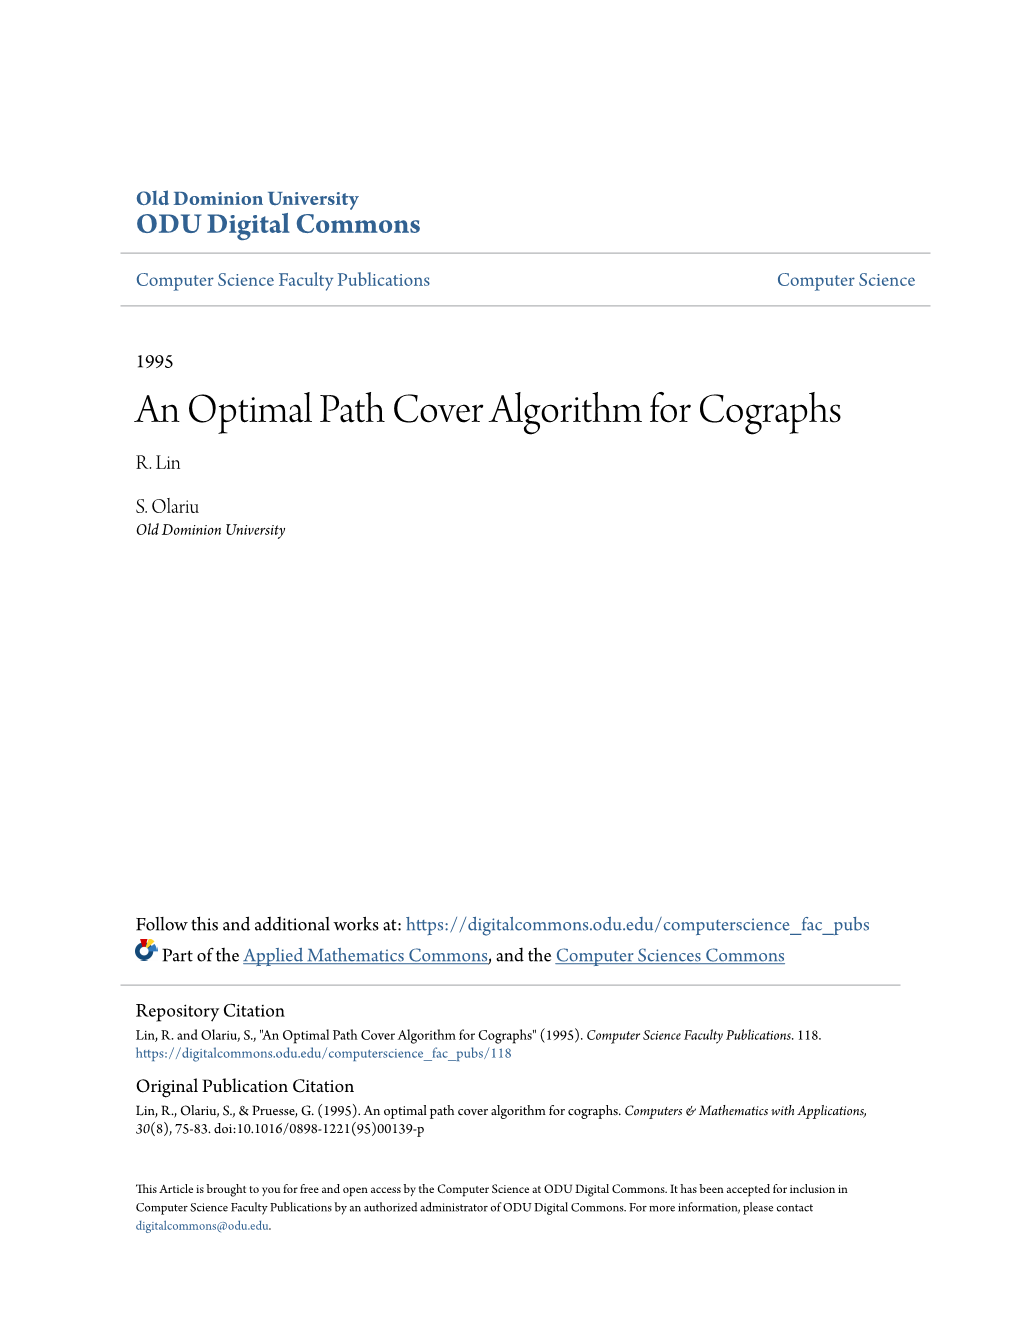 An Optimal Path Cover Algorithm for Cographs R